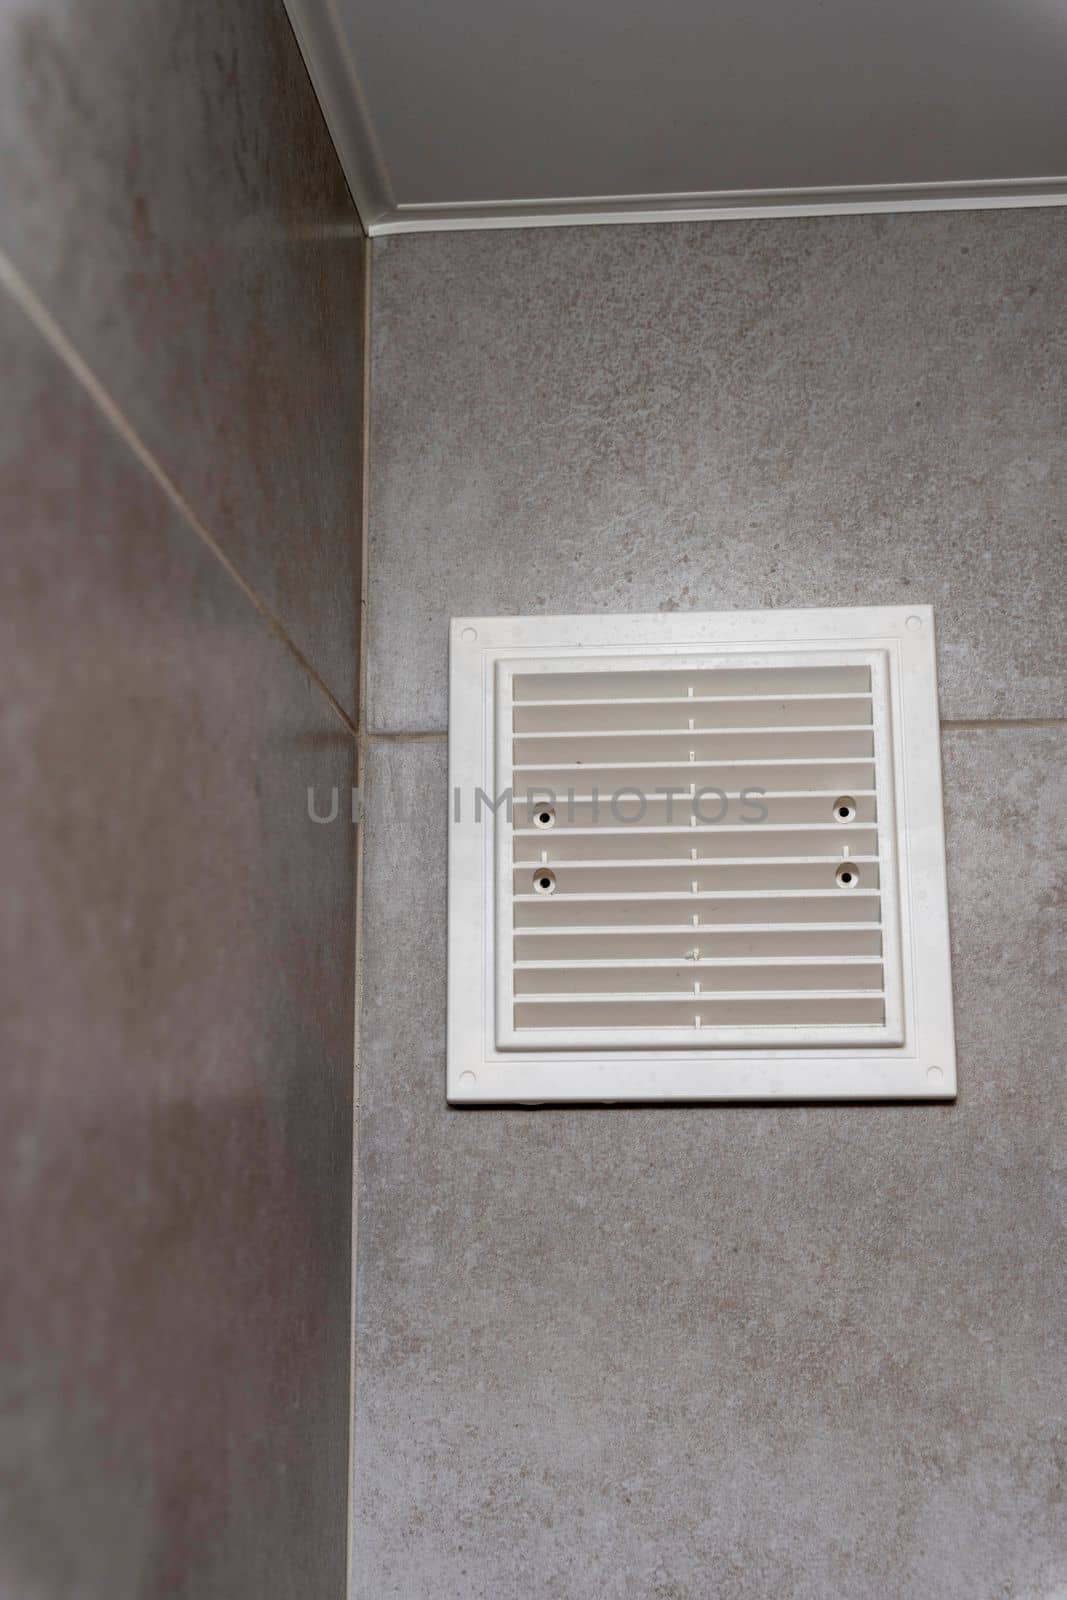 plastic white ventilation grille in the bathroom. Ventilation device by audiznam2609